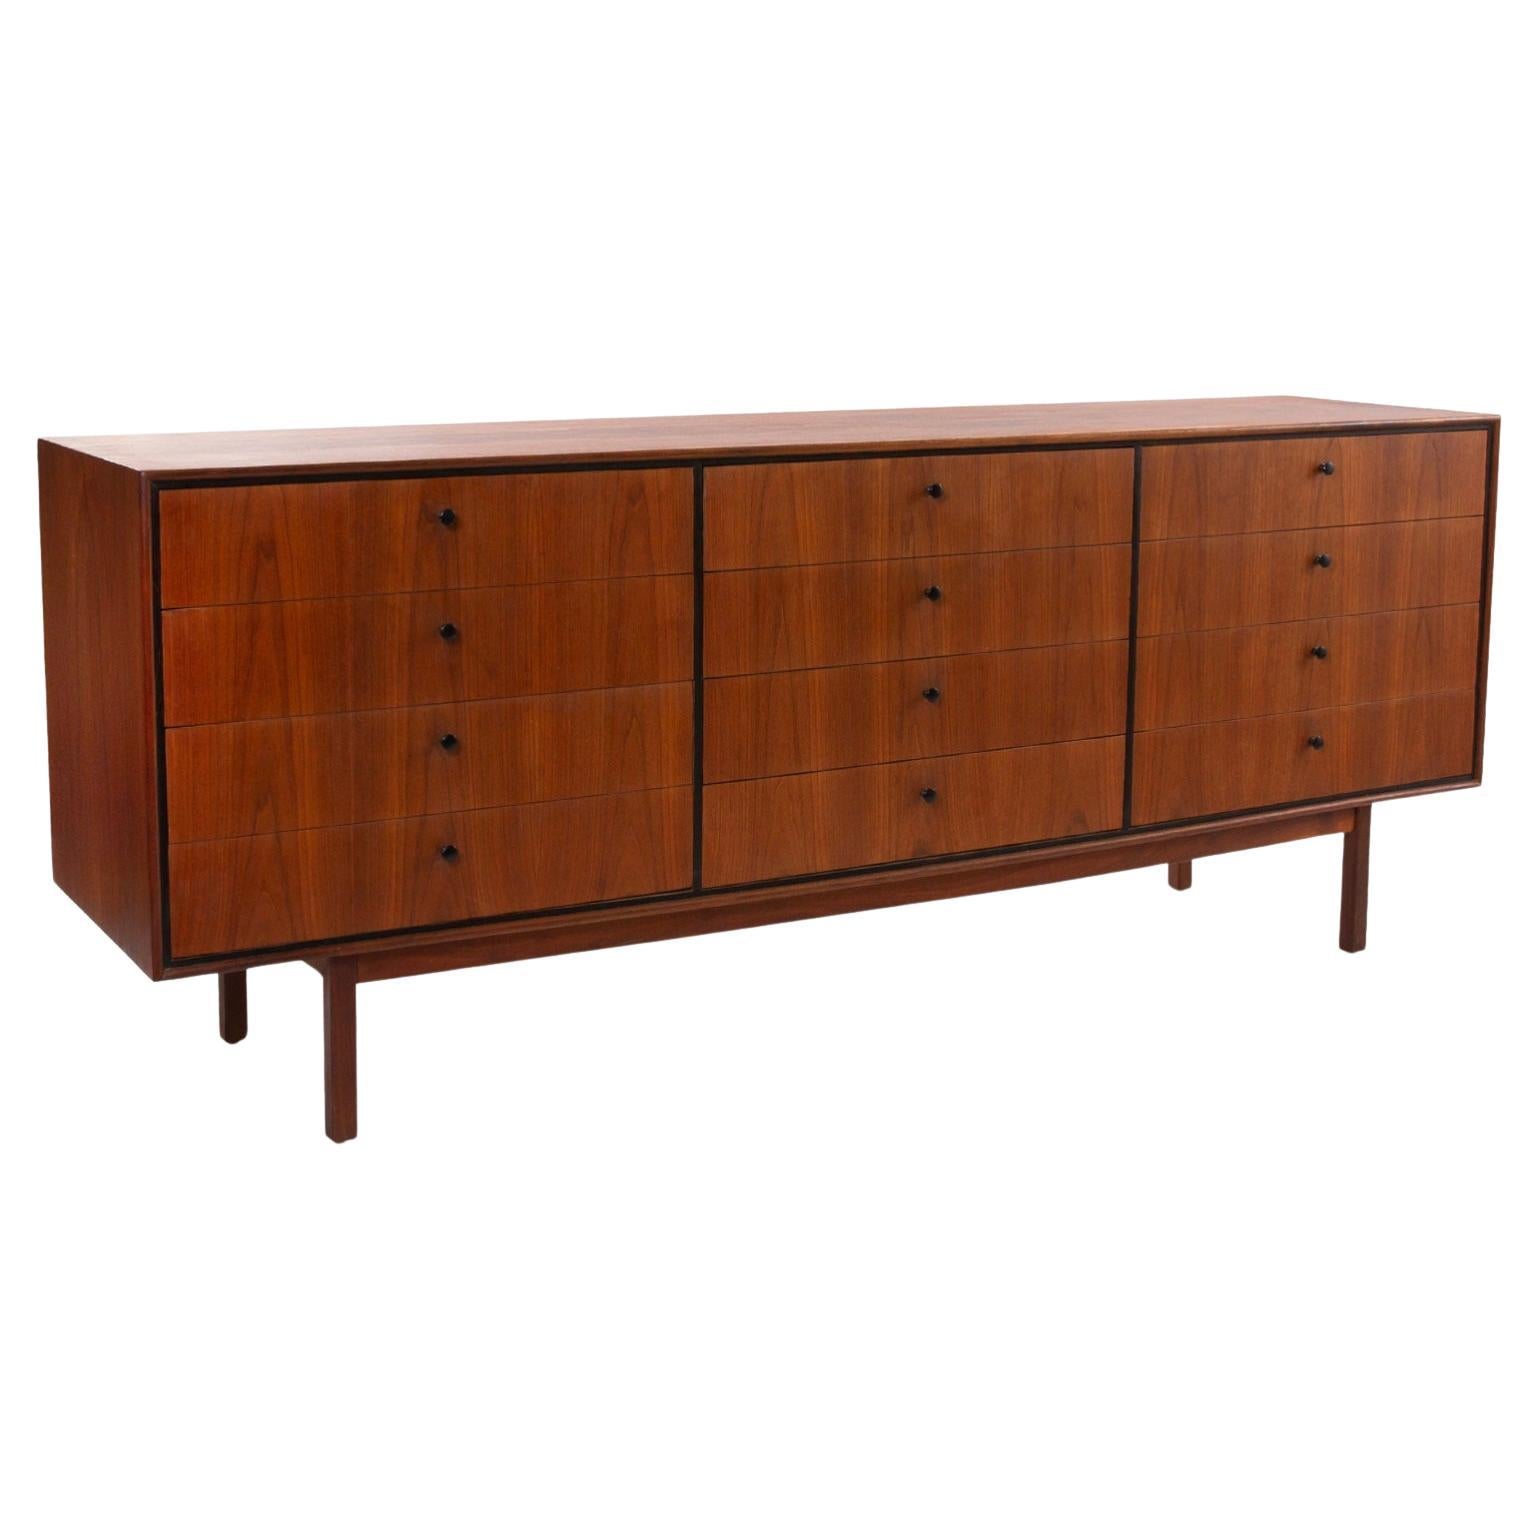 Milo Baughman for Arch Gordon 12 drawer long Walnut dresser. Very nice walnut Veneer dresser with black brass pulls on a solid walnut 4 square leg base. Very nice design with lots of storage. Made in USA circa 1960. Located in Brooklyn